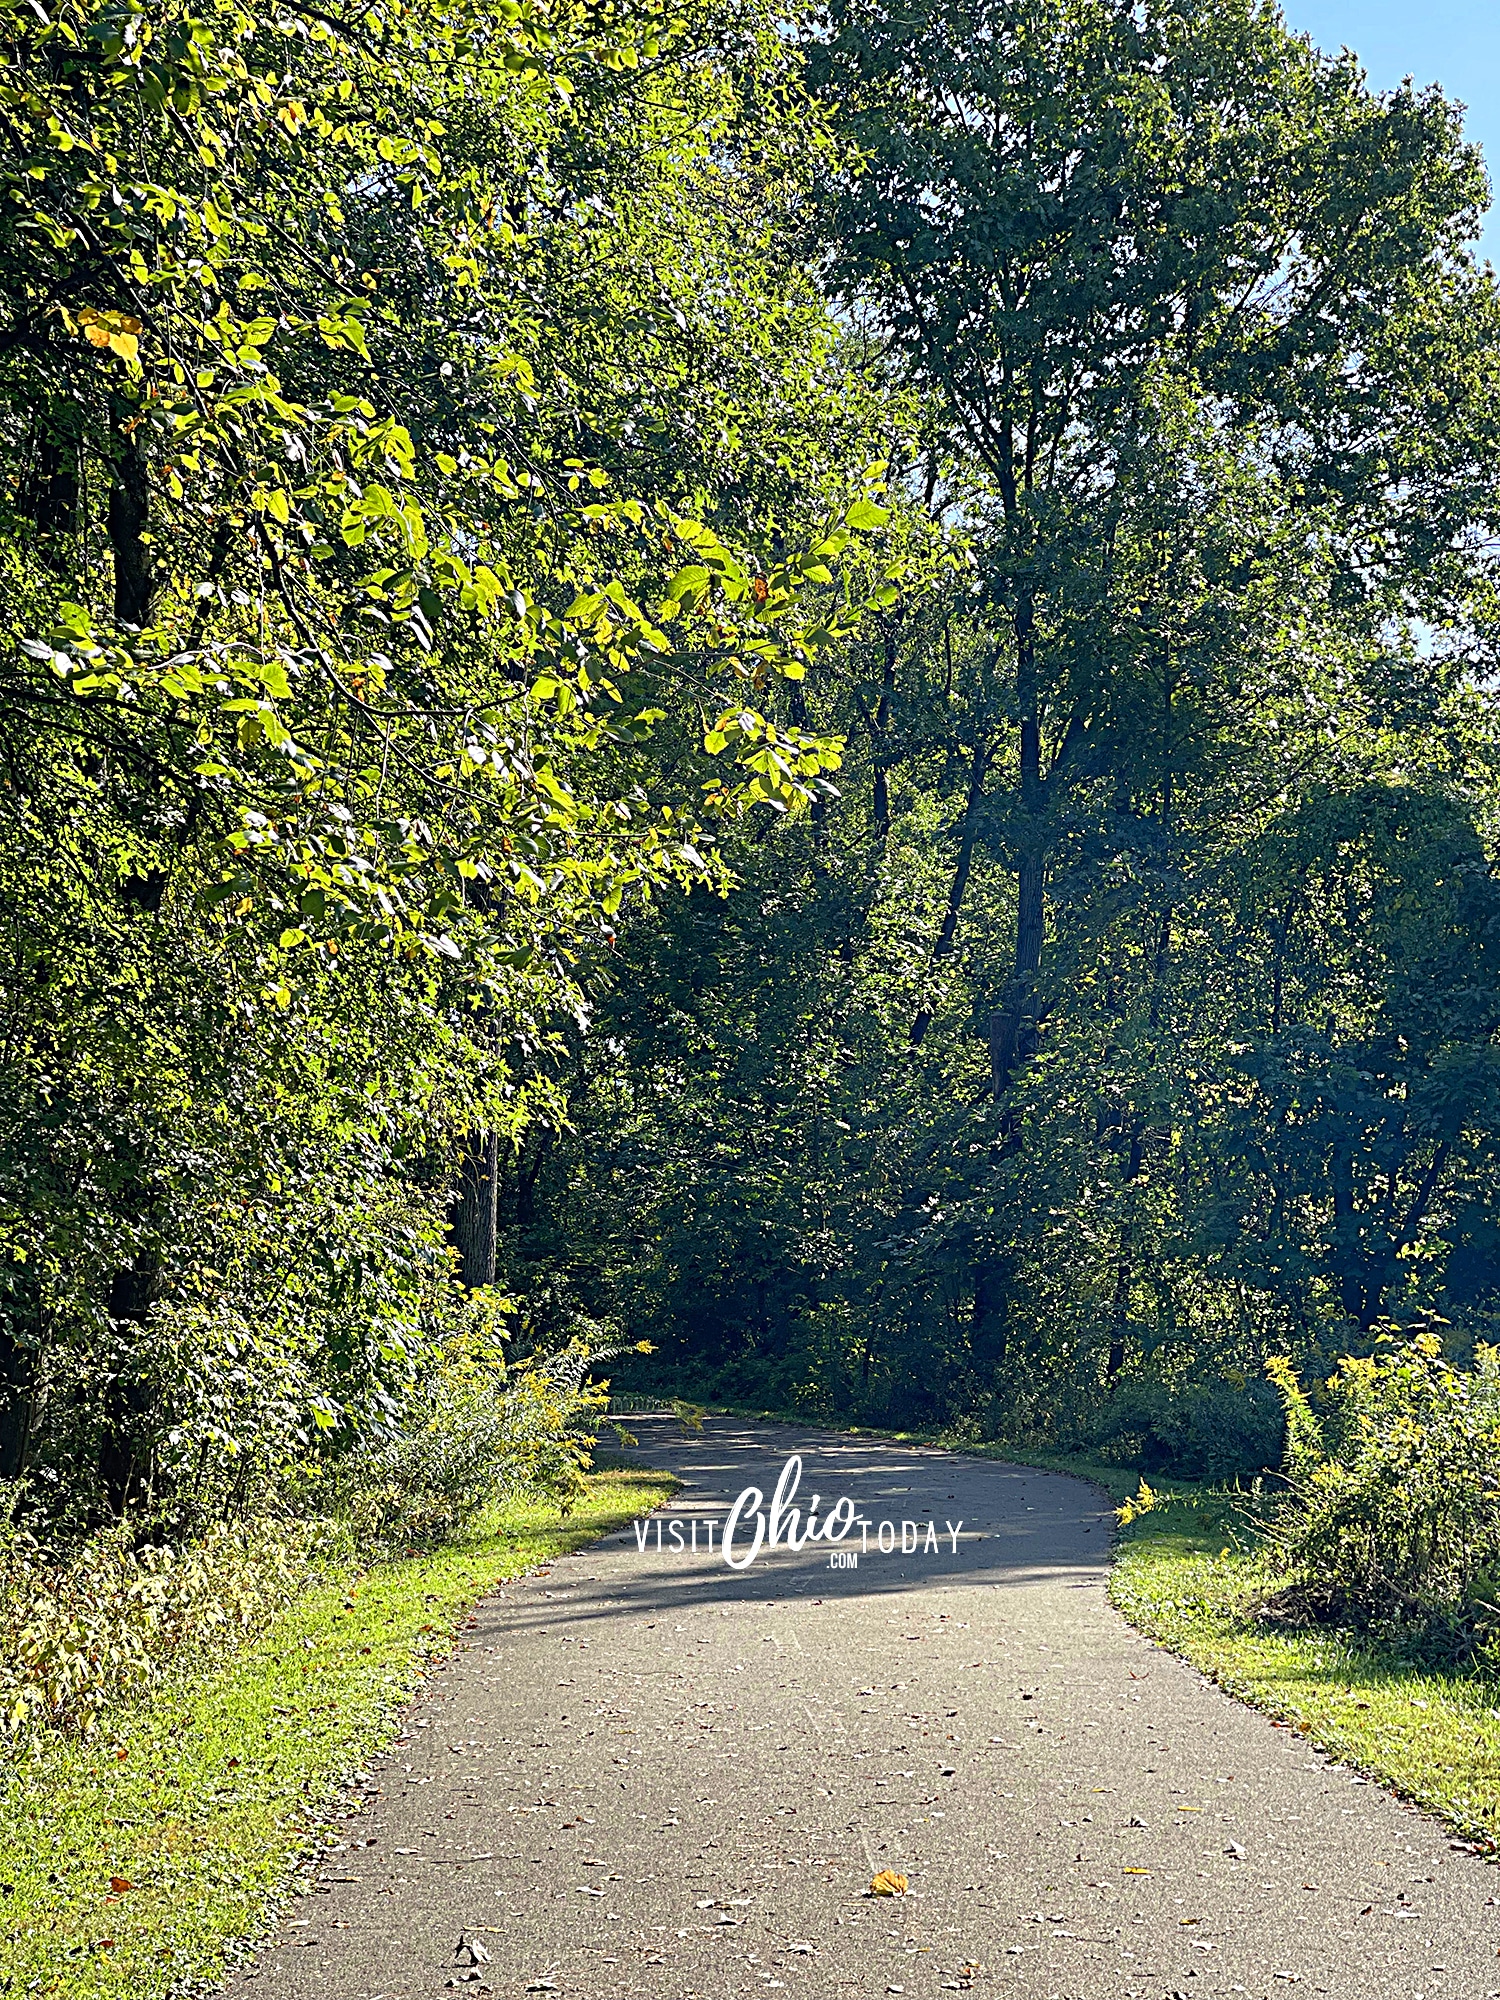 vertical photo showing a grey paved path into a green forest with trees with green leaves and green grass. Photo credit: Cindy Gordon of VisitOhioToday.com